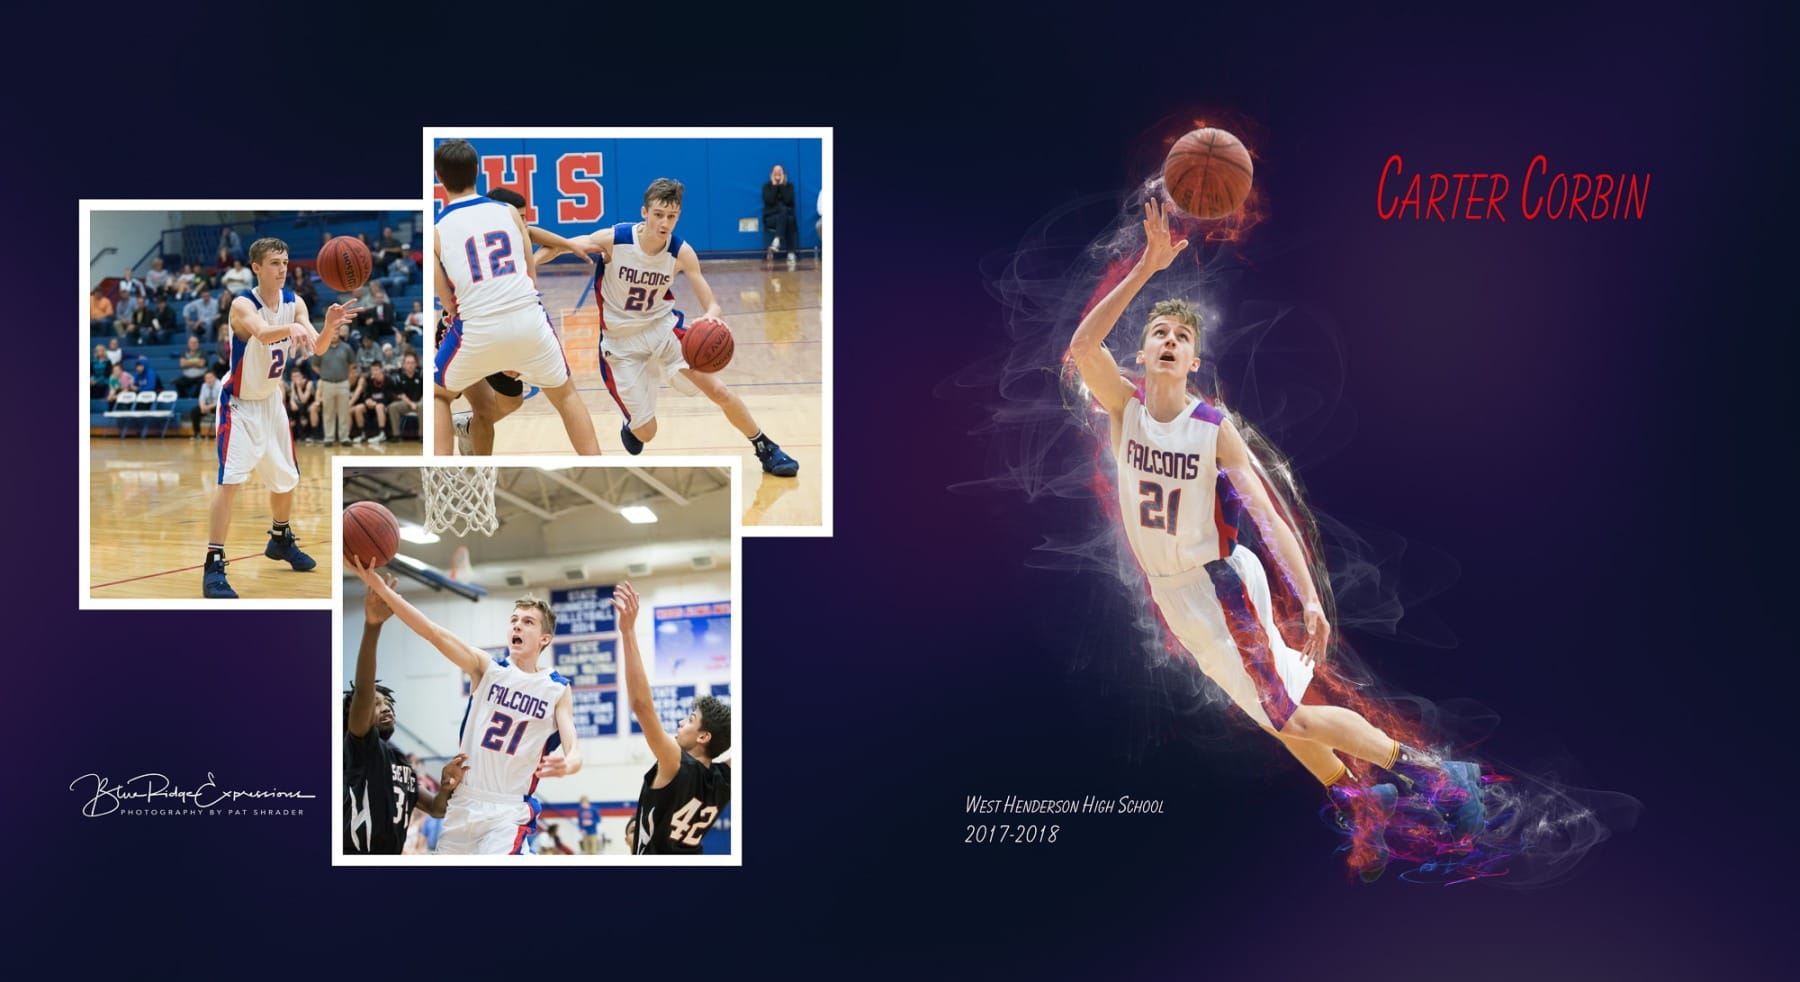 This is a custom cover for West Henderson High School player Carter Corbin's Memory Book.